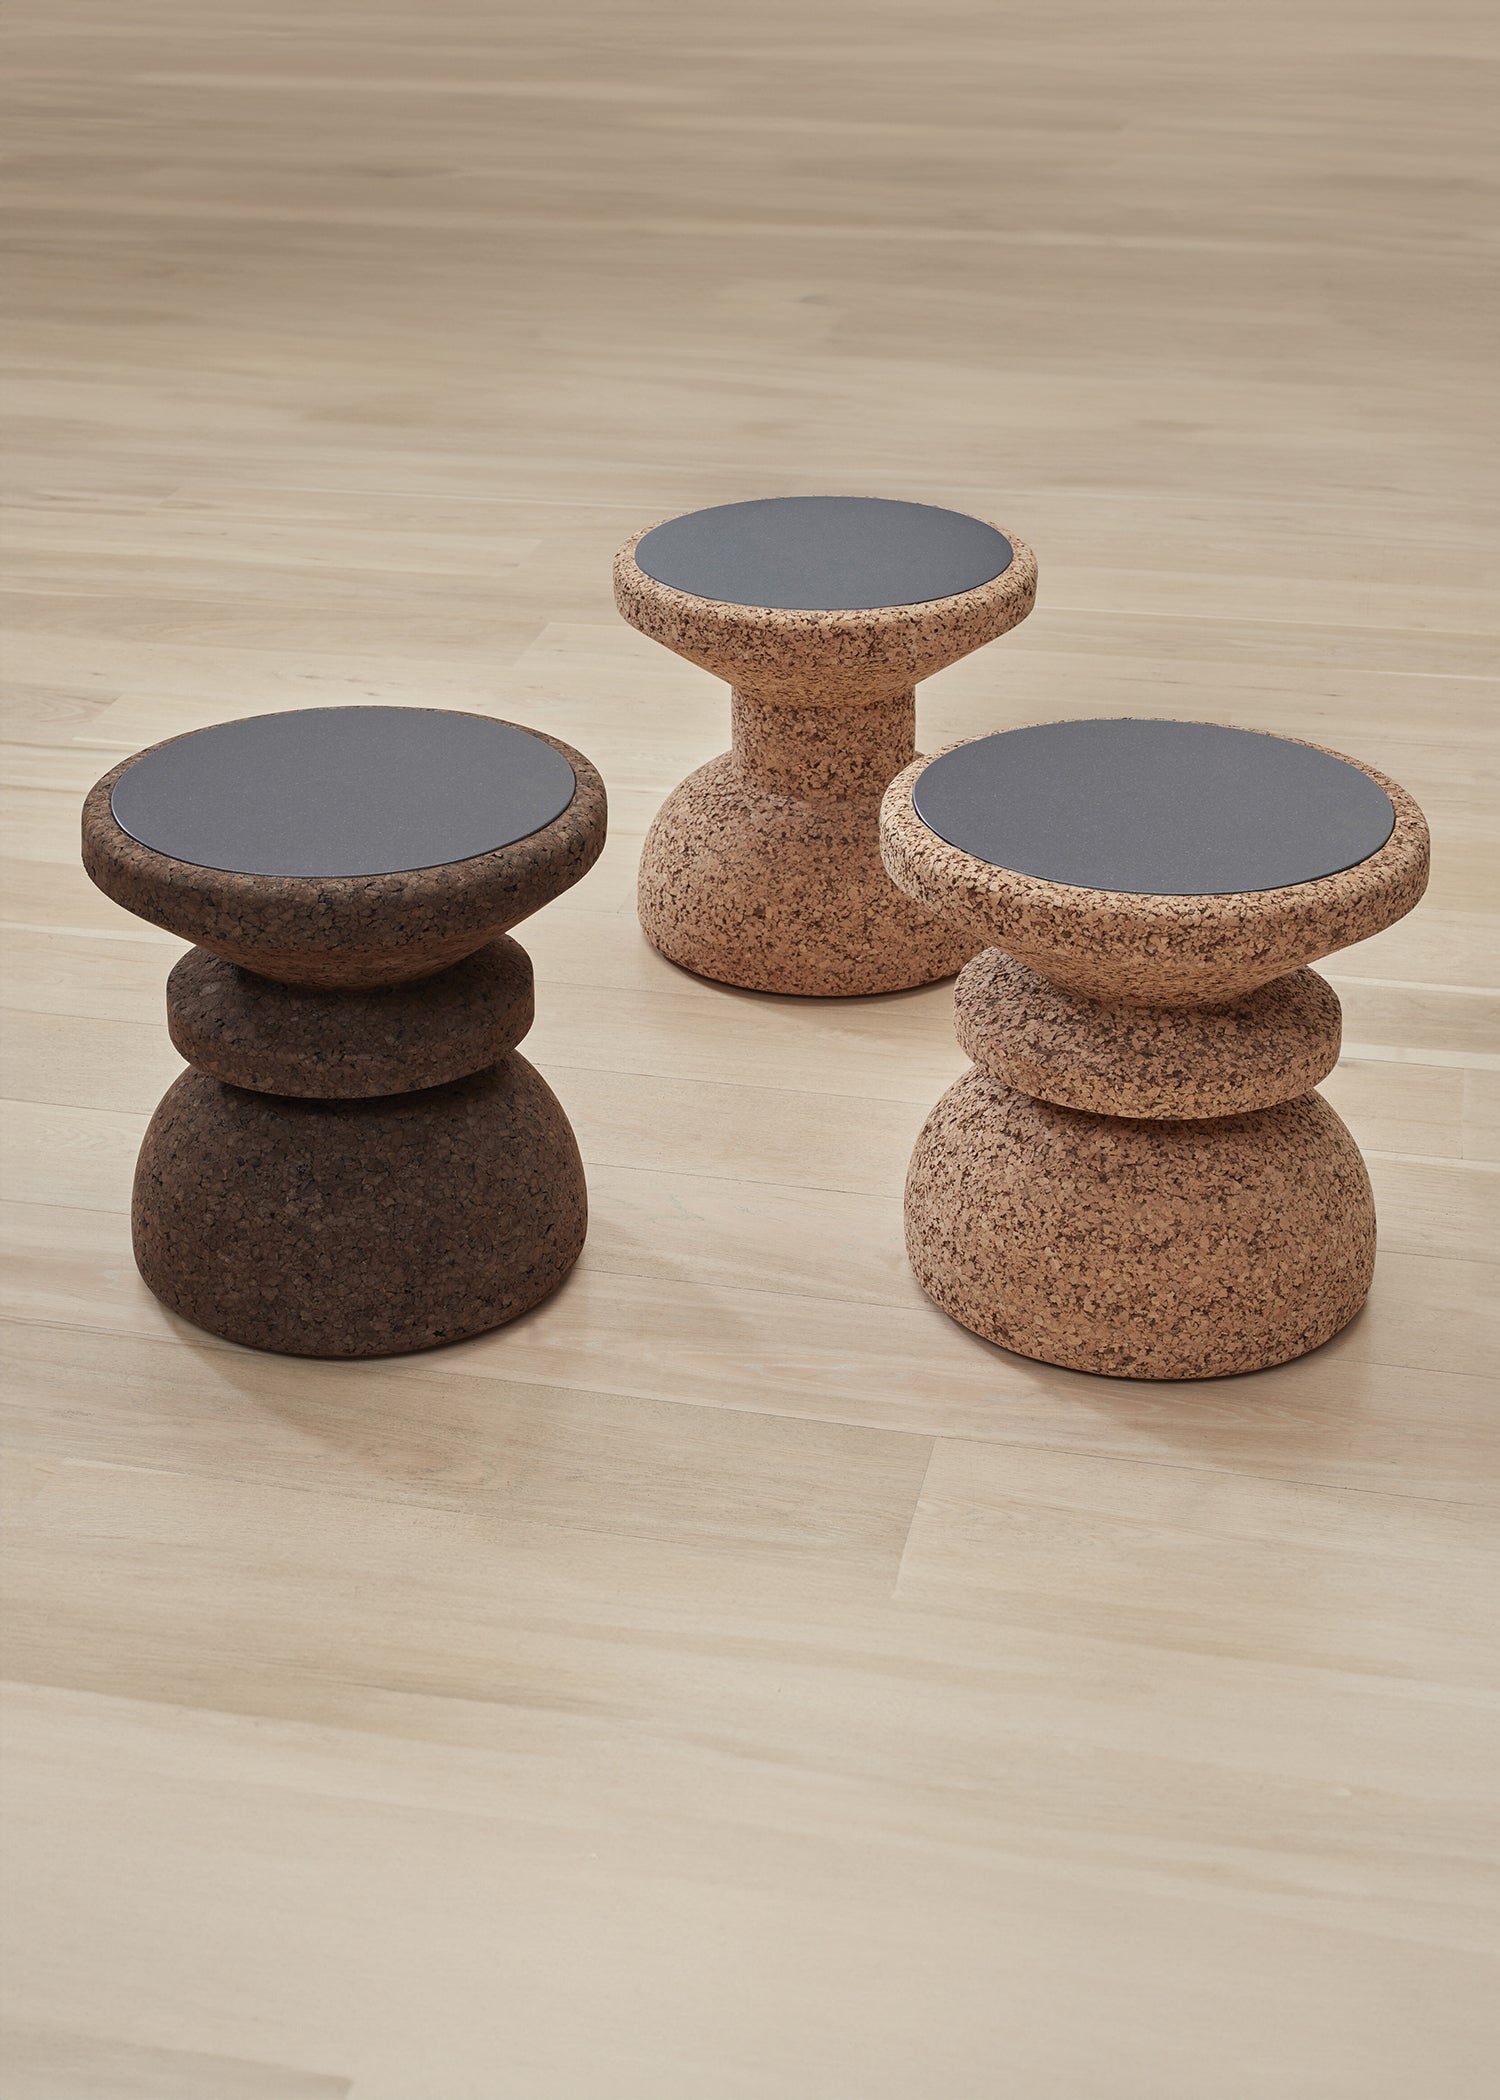 Kanju's Wiid African Cork & Granite Side Table, a masterpiece of luxury design, featuring a harmonious blend of natural cork and polished granite. This exquisite piece reflects the innovative spirit of African craftsmanship, perfect for adding a touch of elegance and sustainability to upscale interiors.